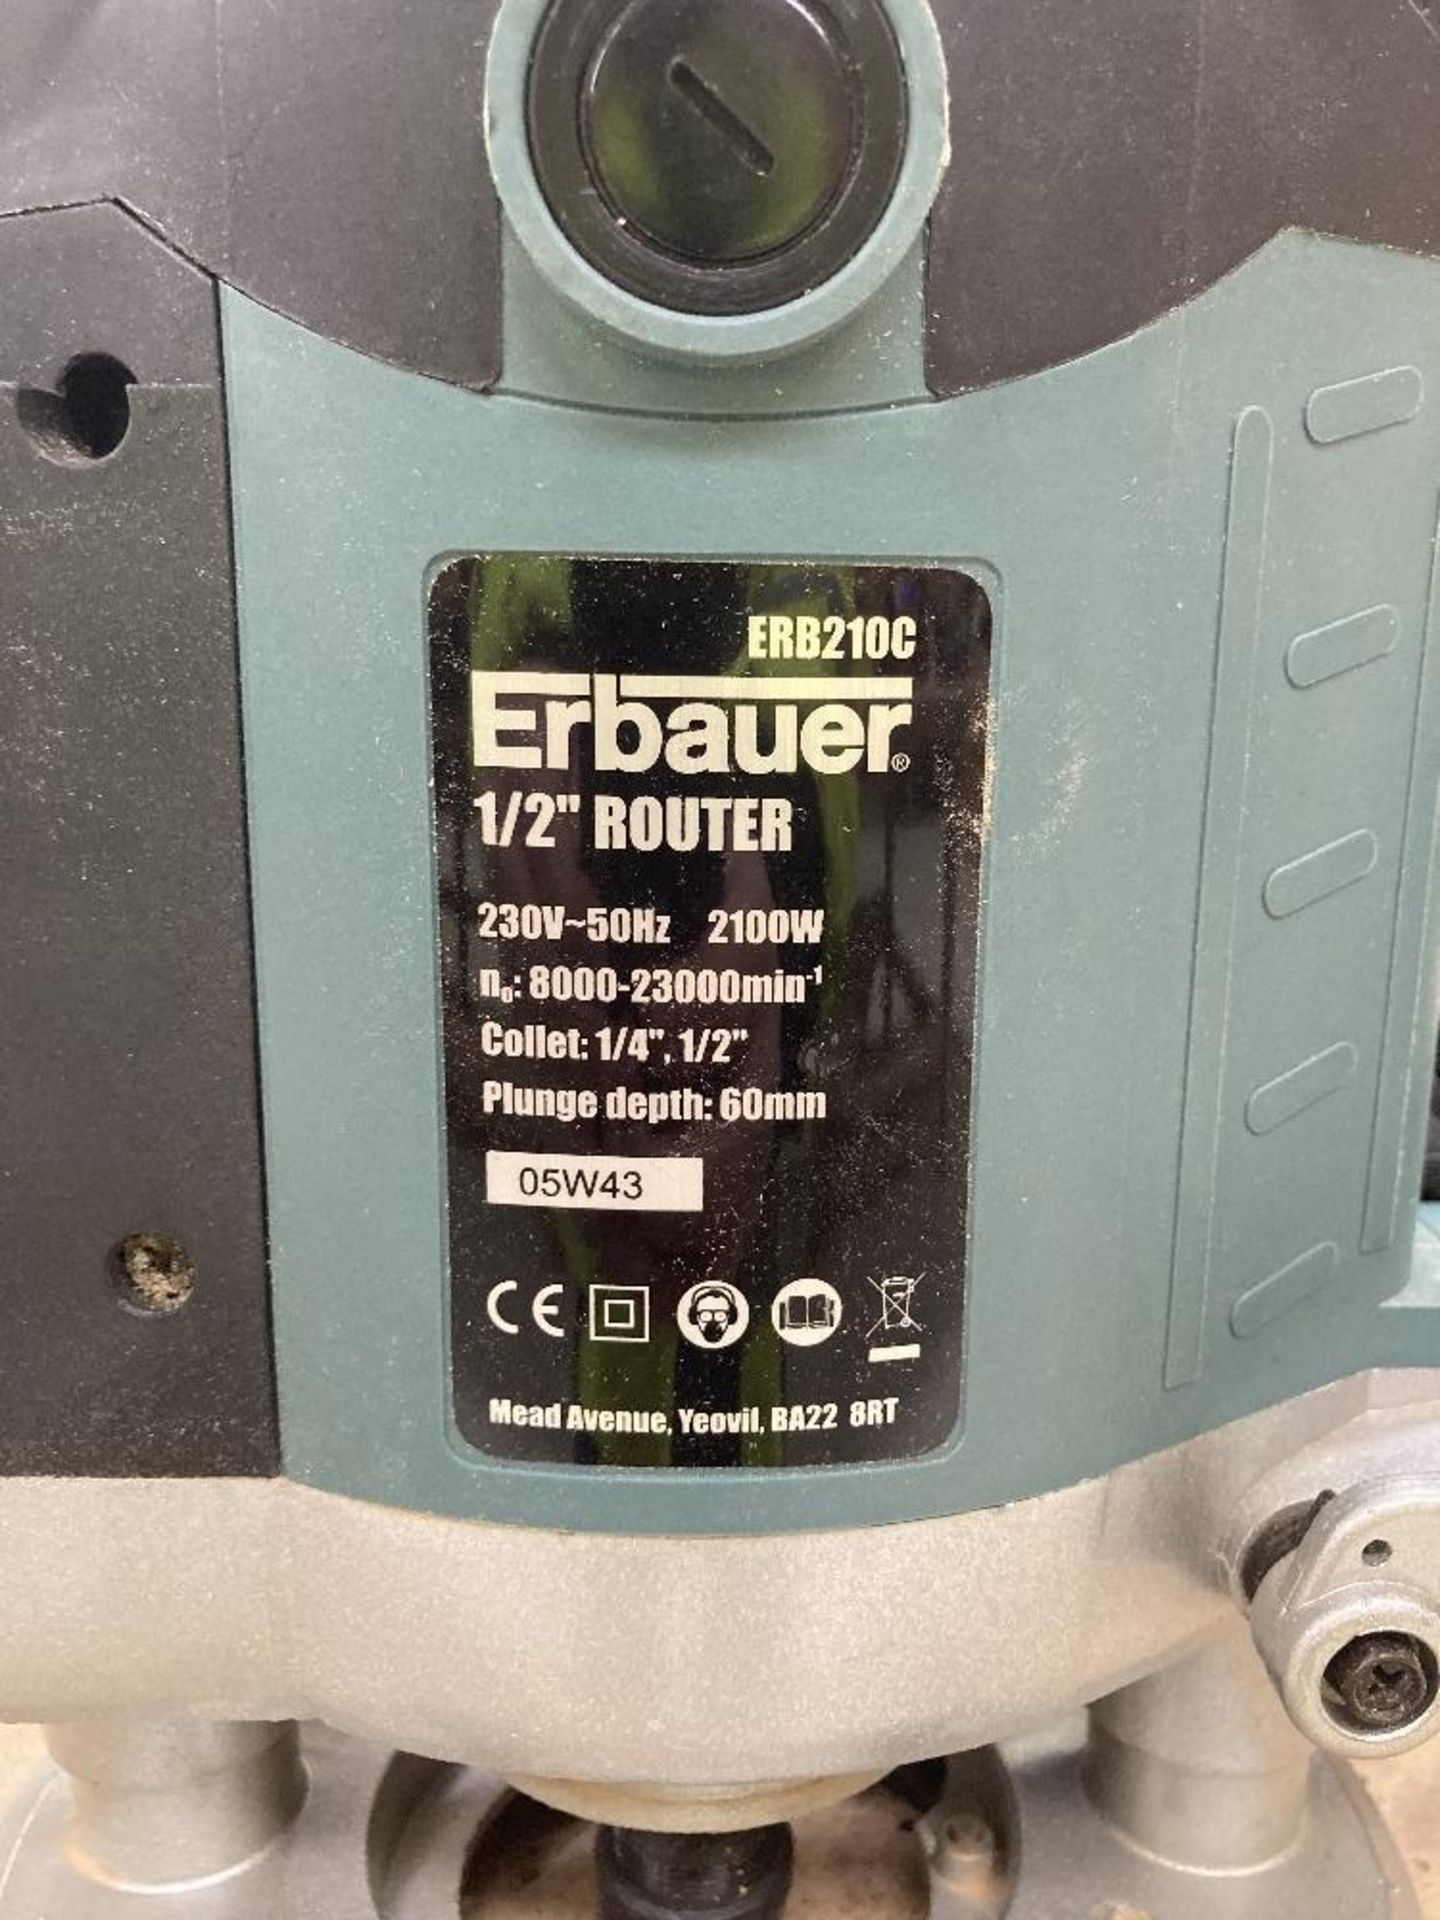 Erbauer ERB210C 1/2" Router & Heavy Duty Carry Case - Image 4 of 8